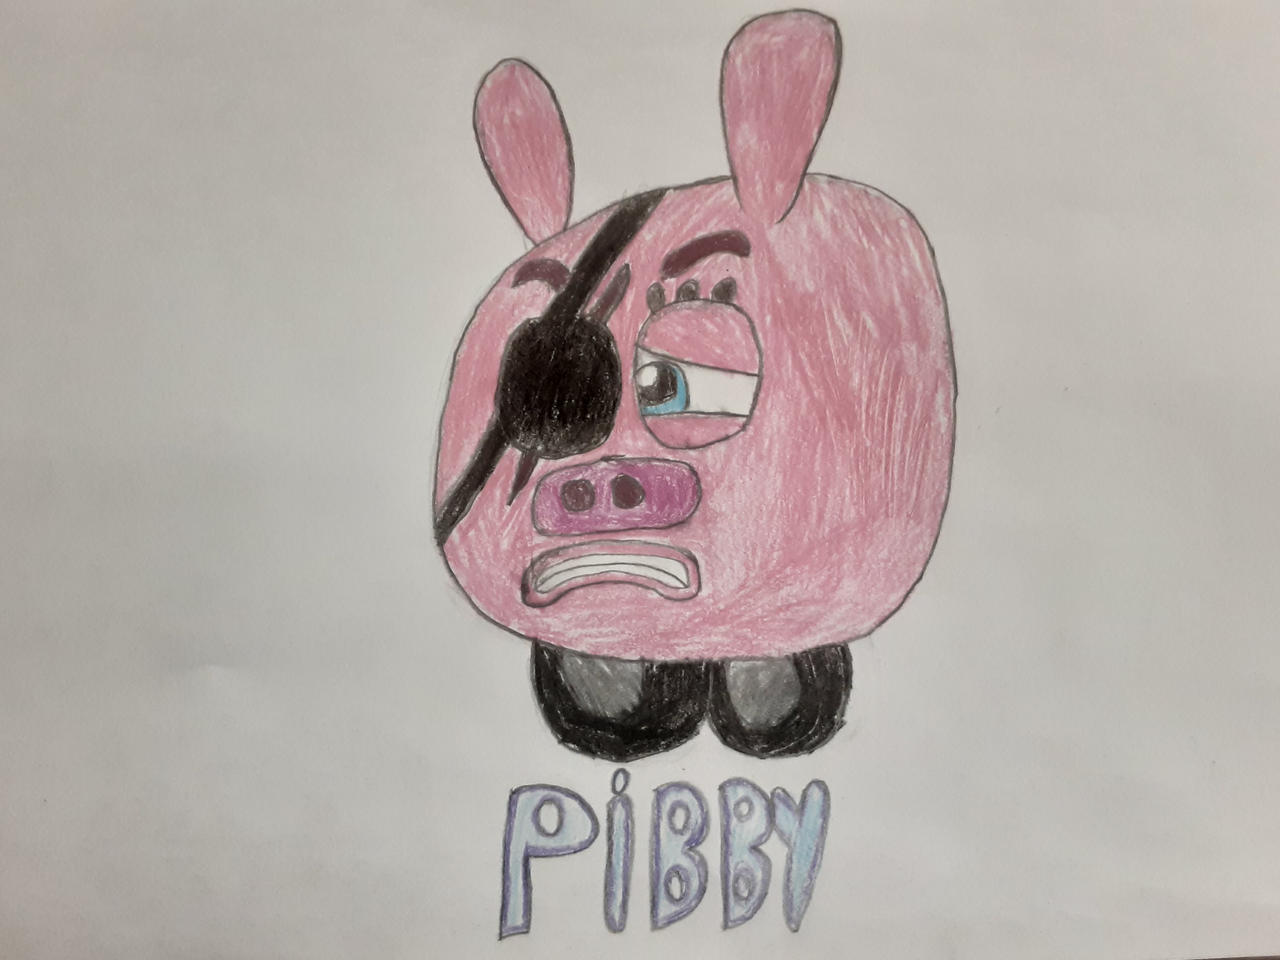 Come and Learn with Pibby, our only hope in the upcoming Cartoon Apocalypse, by M N A